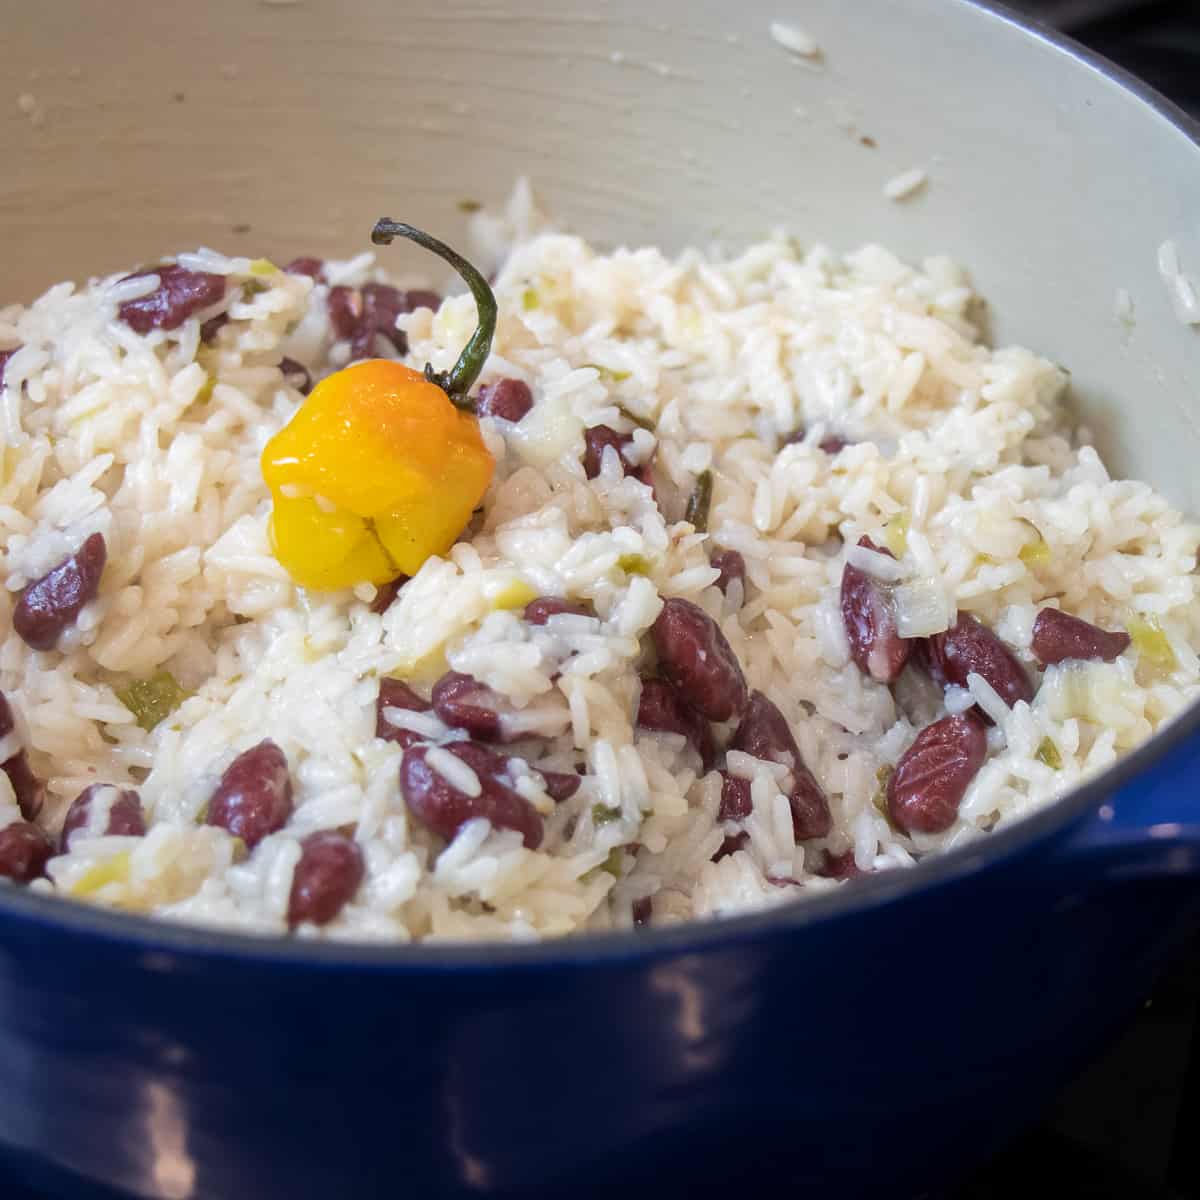 Rice and beans fully cooked in the pot with a scotch bonnet pepper resting on top.